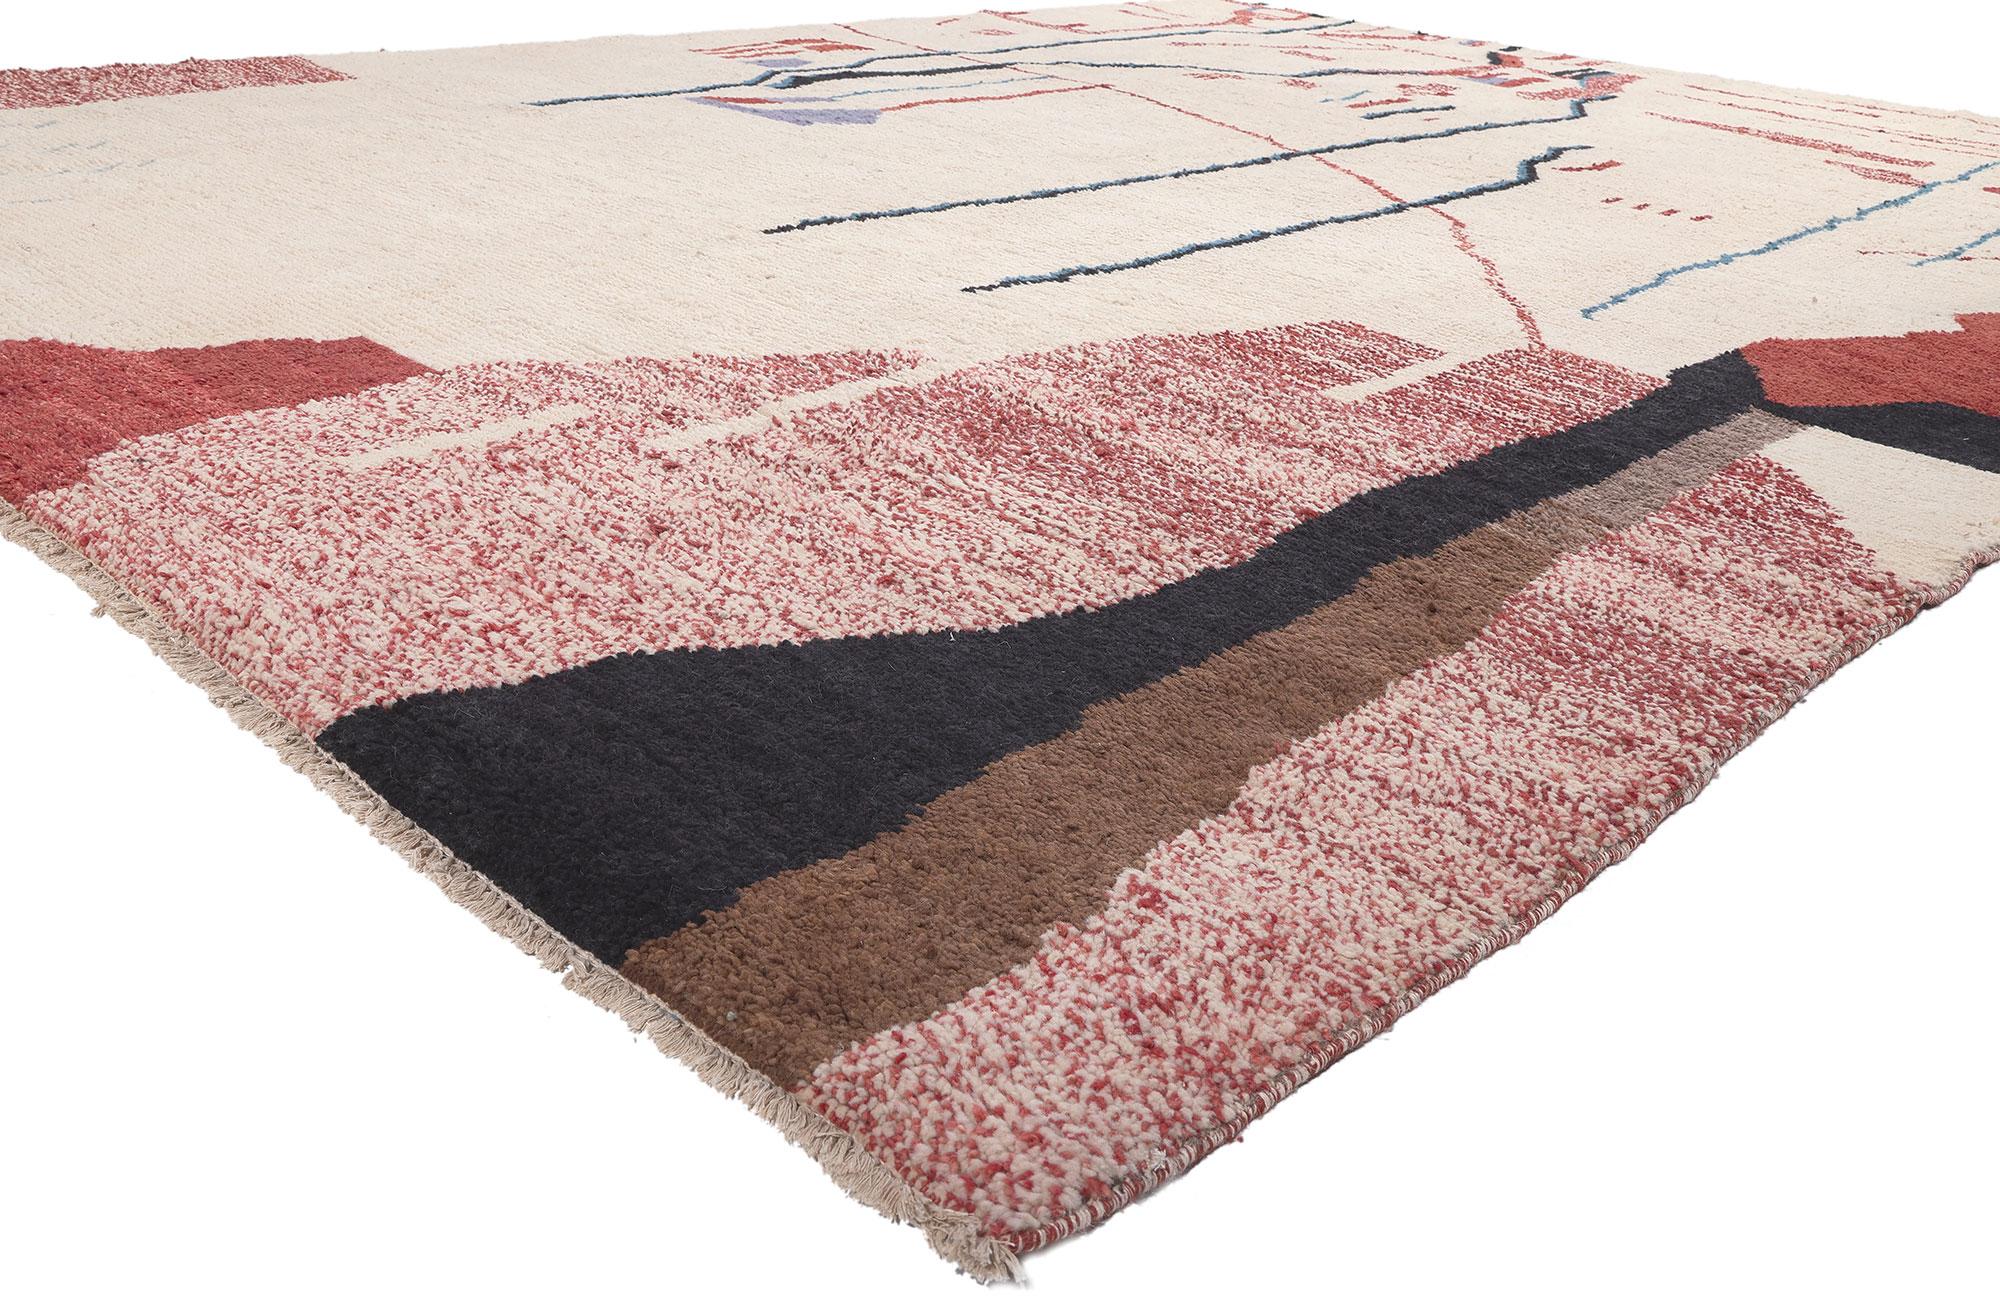 81015 Modern Brutalist Moroccan Rug, 10'04 x 13'07.
Emanating Brutalist style with incredible detail and texture, this modern Moroccan area rug is a captivating vision of woven beauty. The asymmetrical silhouette and dissonant colorway woven into